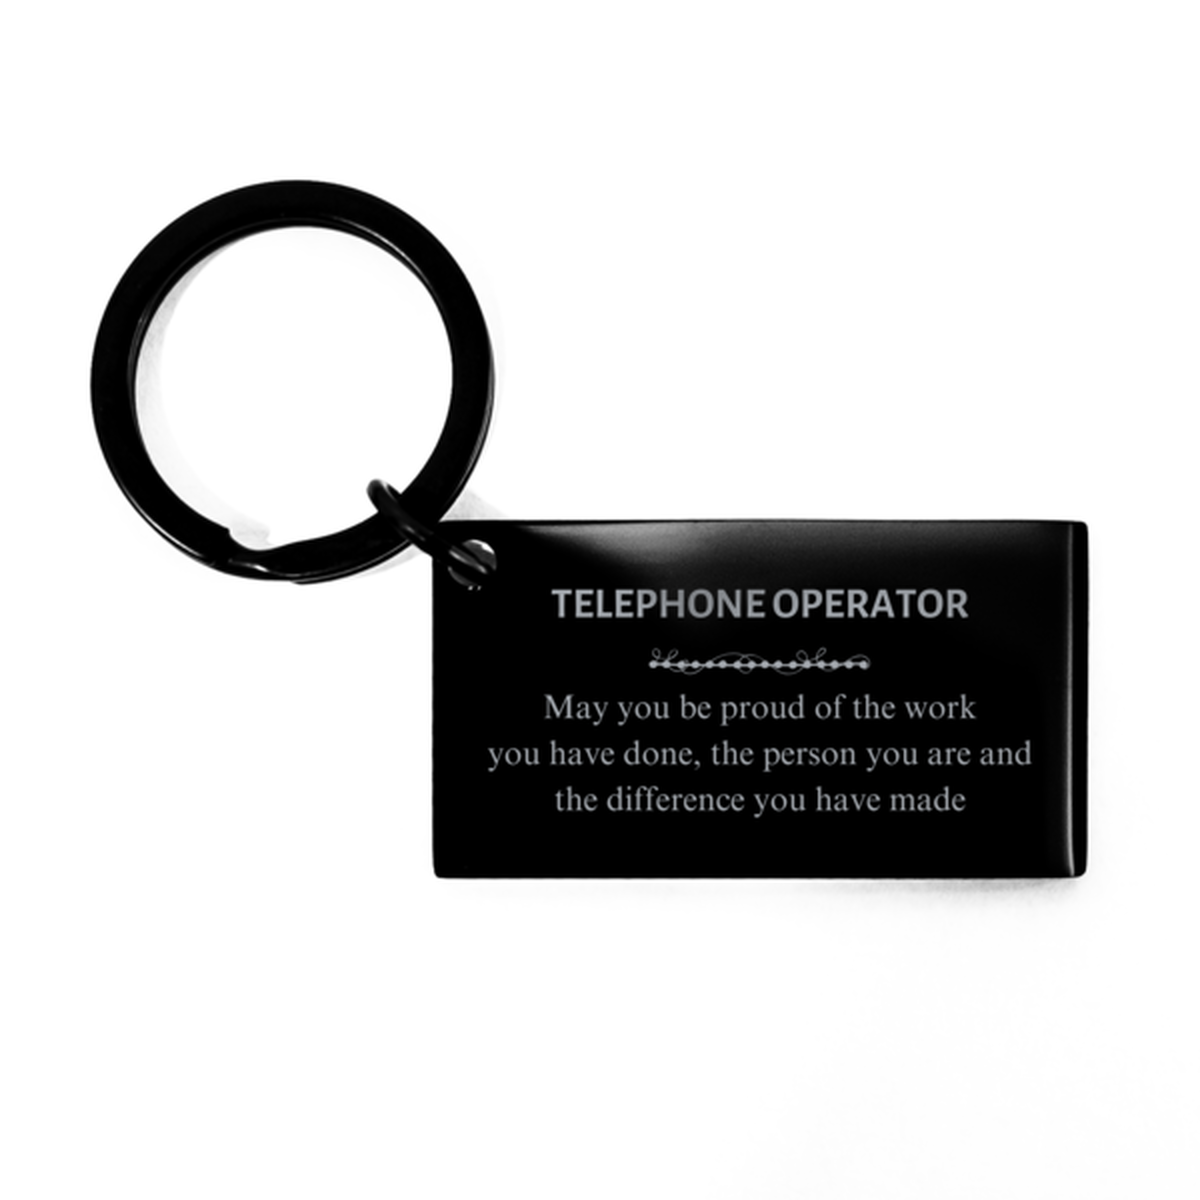 X-Ray Technician May you be proud of the work you have done, Retirement Telephone Operator Keychain for Colleague Appreciation Gifts Amazing for Telephone Operator